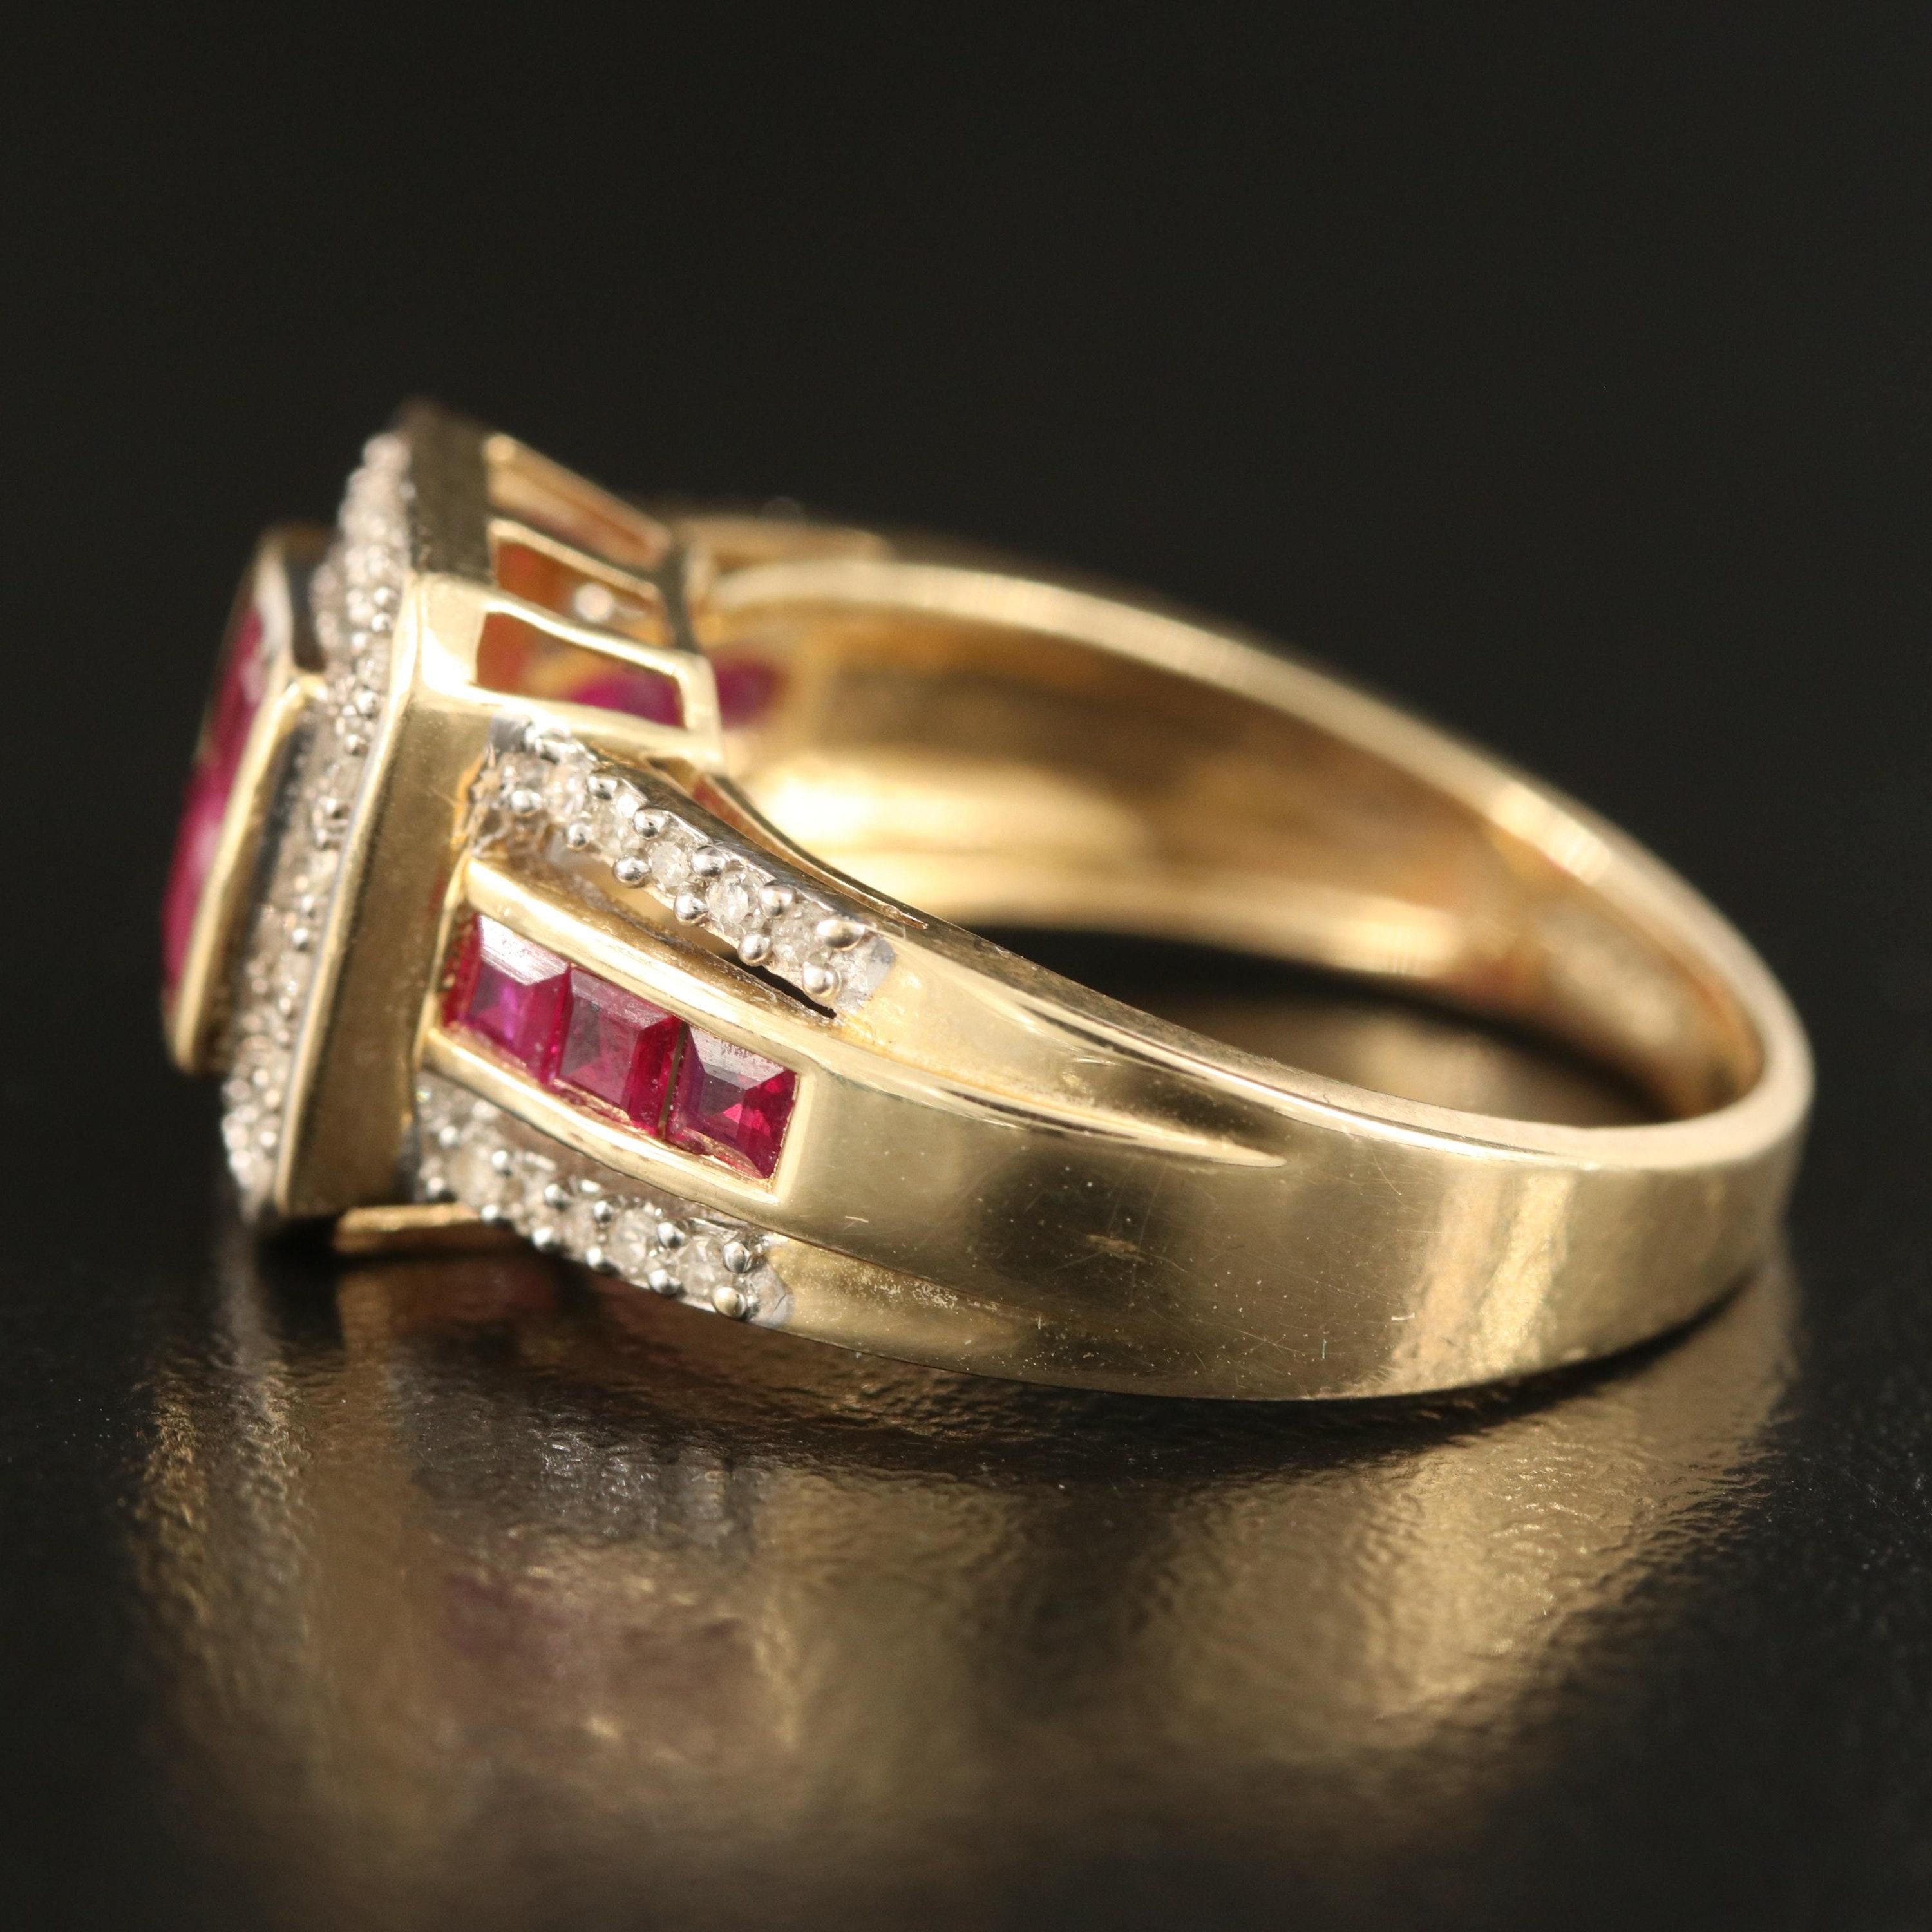 For Sale:  Art Deco Natural Ruby Diamond Engagement Ring Set in 18K Gold, Cocktail Ring 3